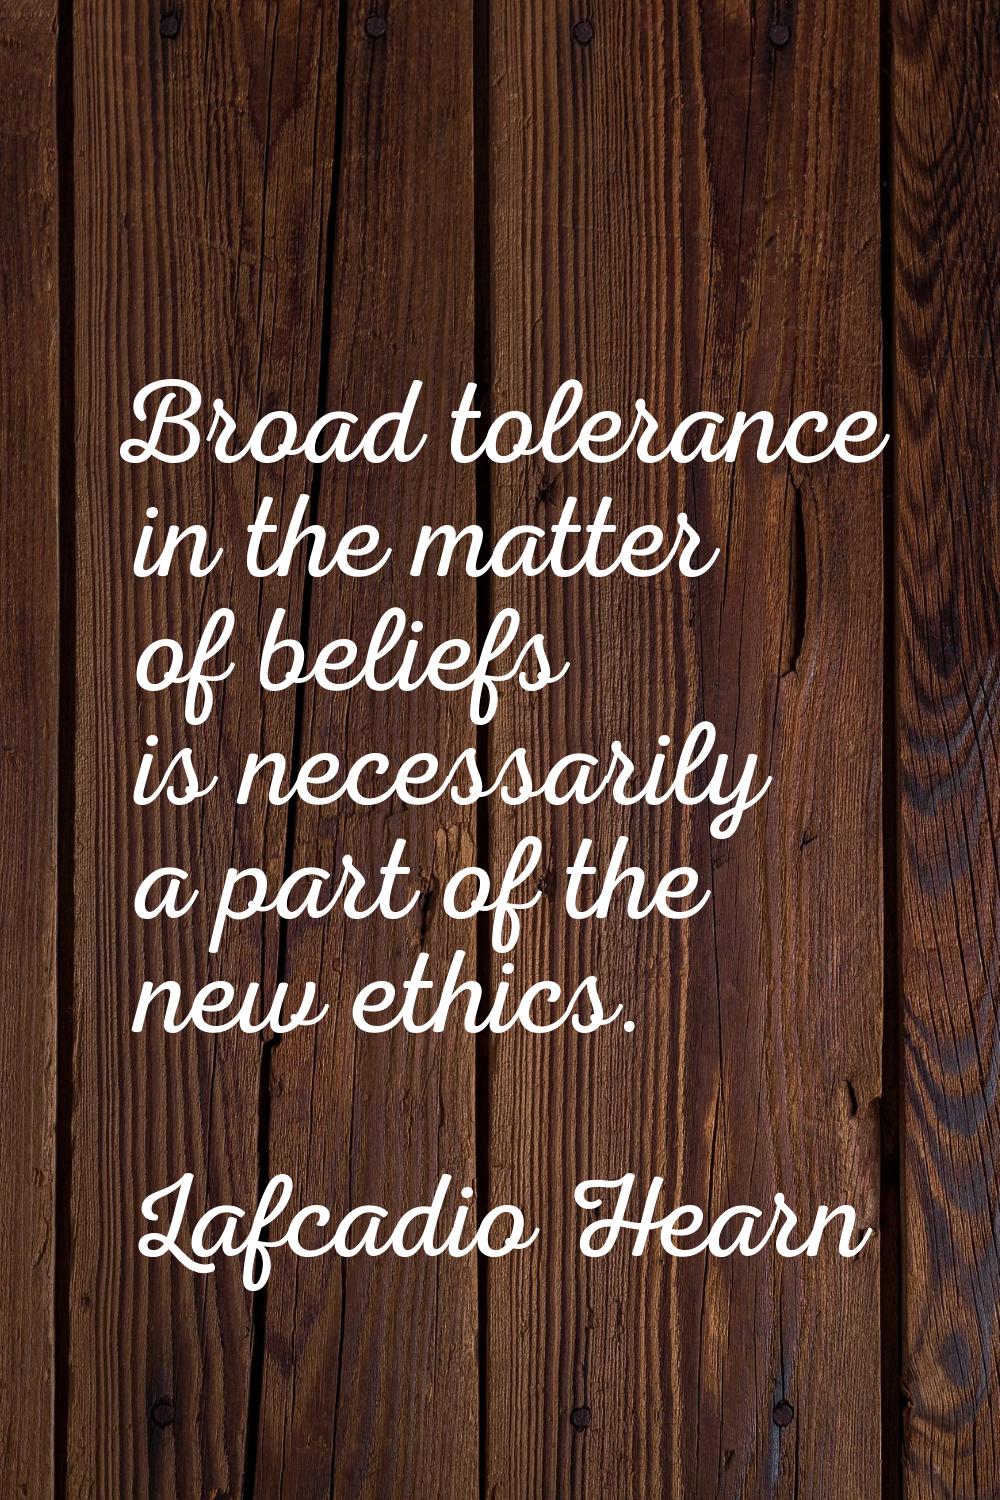 Broad tolerance in the matter of beliefs is necessarily a part of the new ethics.